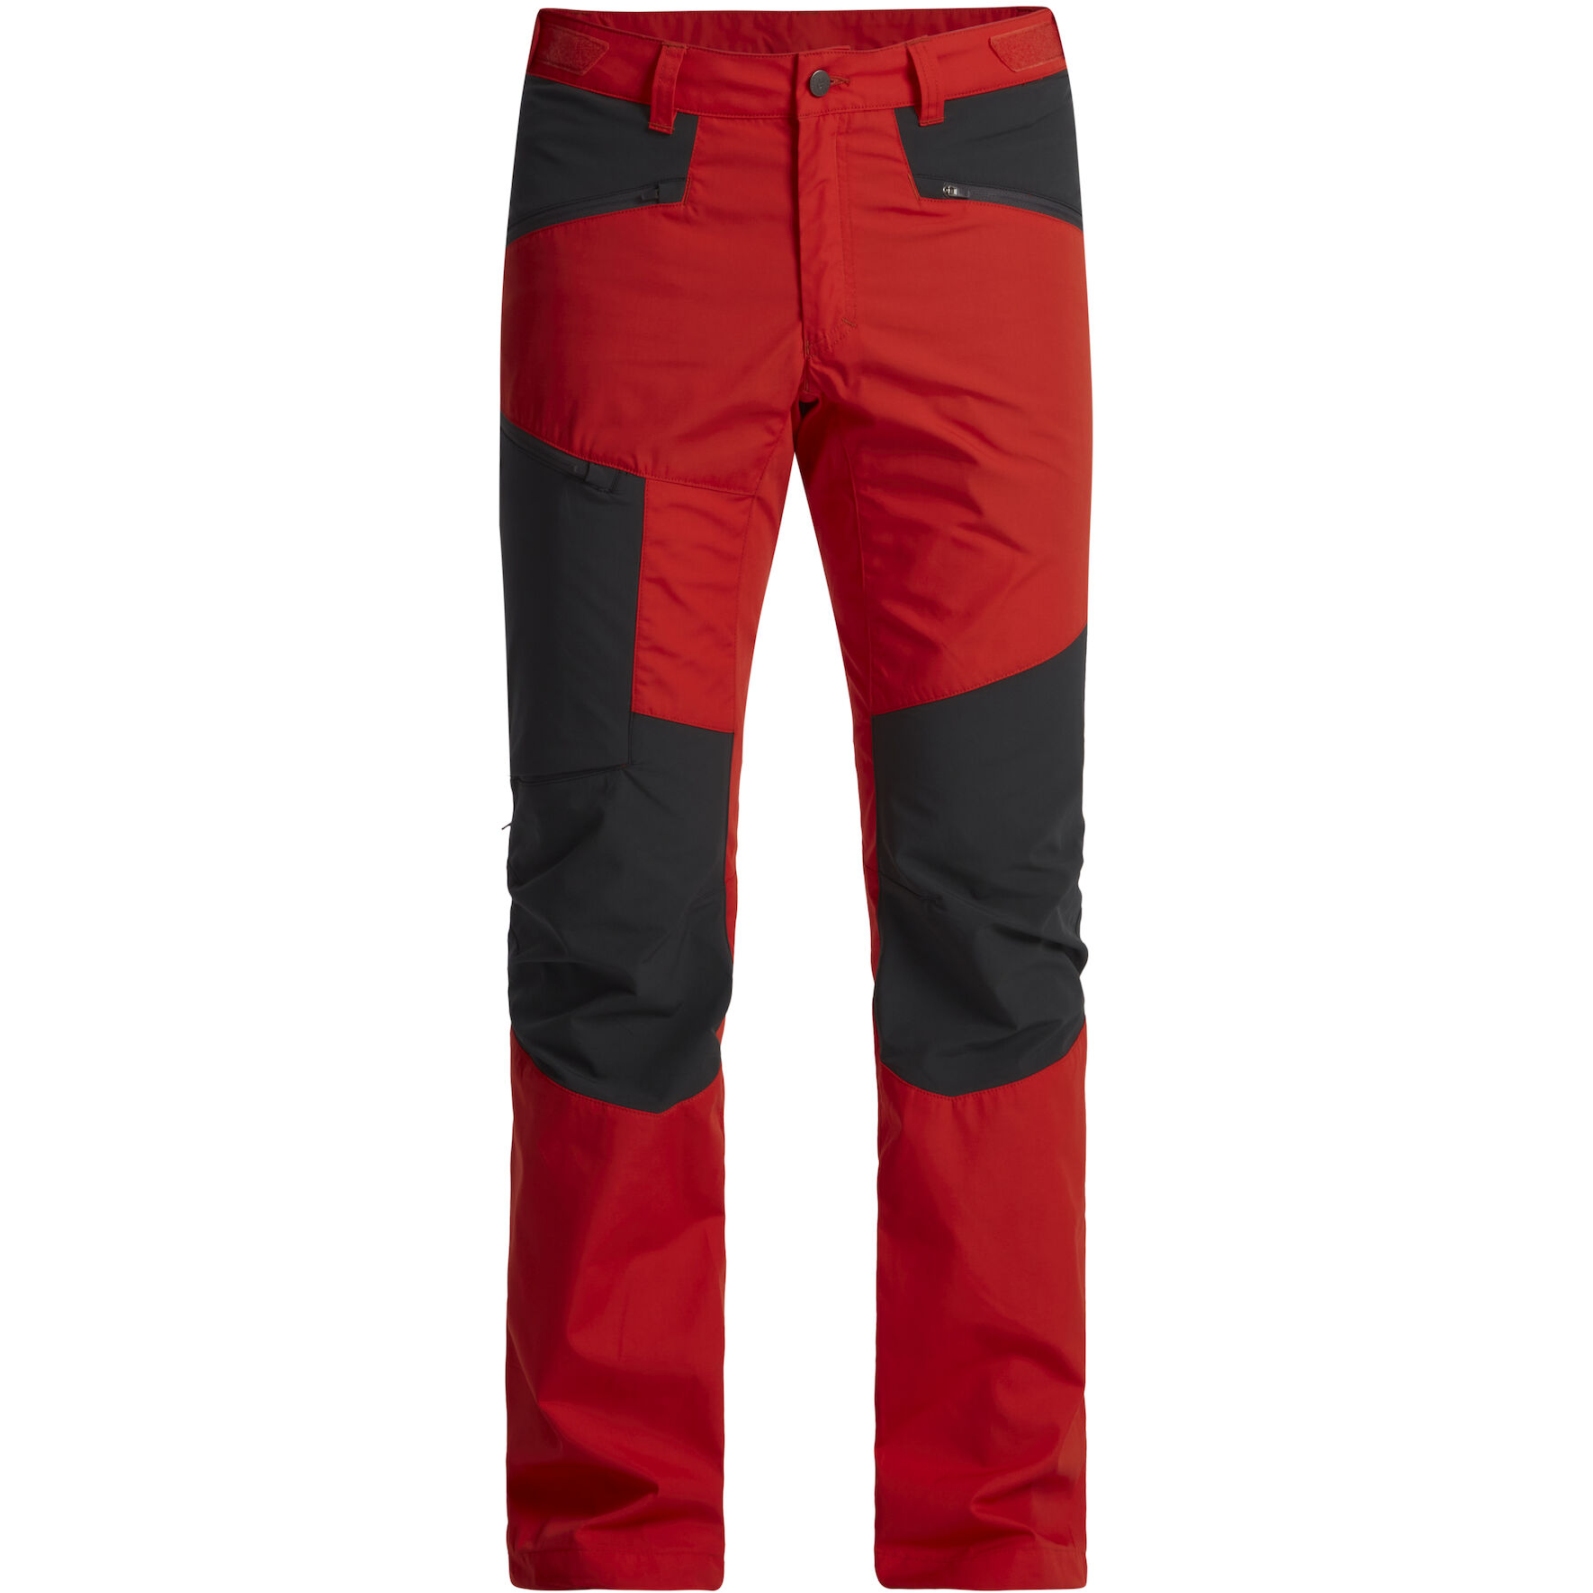 Picture of Lundhags Makke Light Hiking Pants Men - Lively Red/Charcoal 253